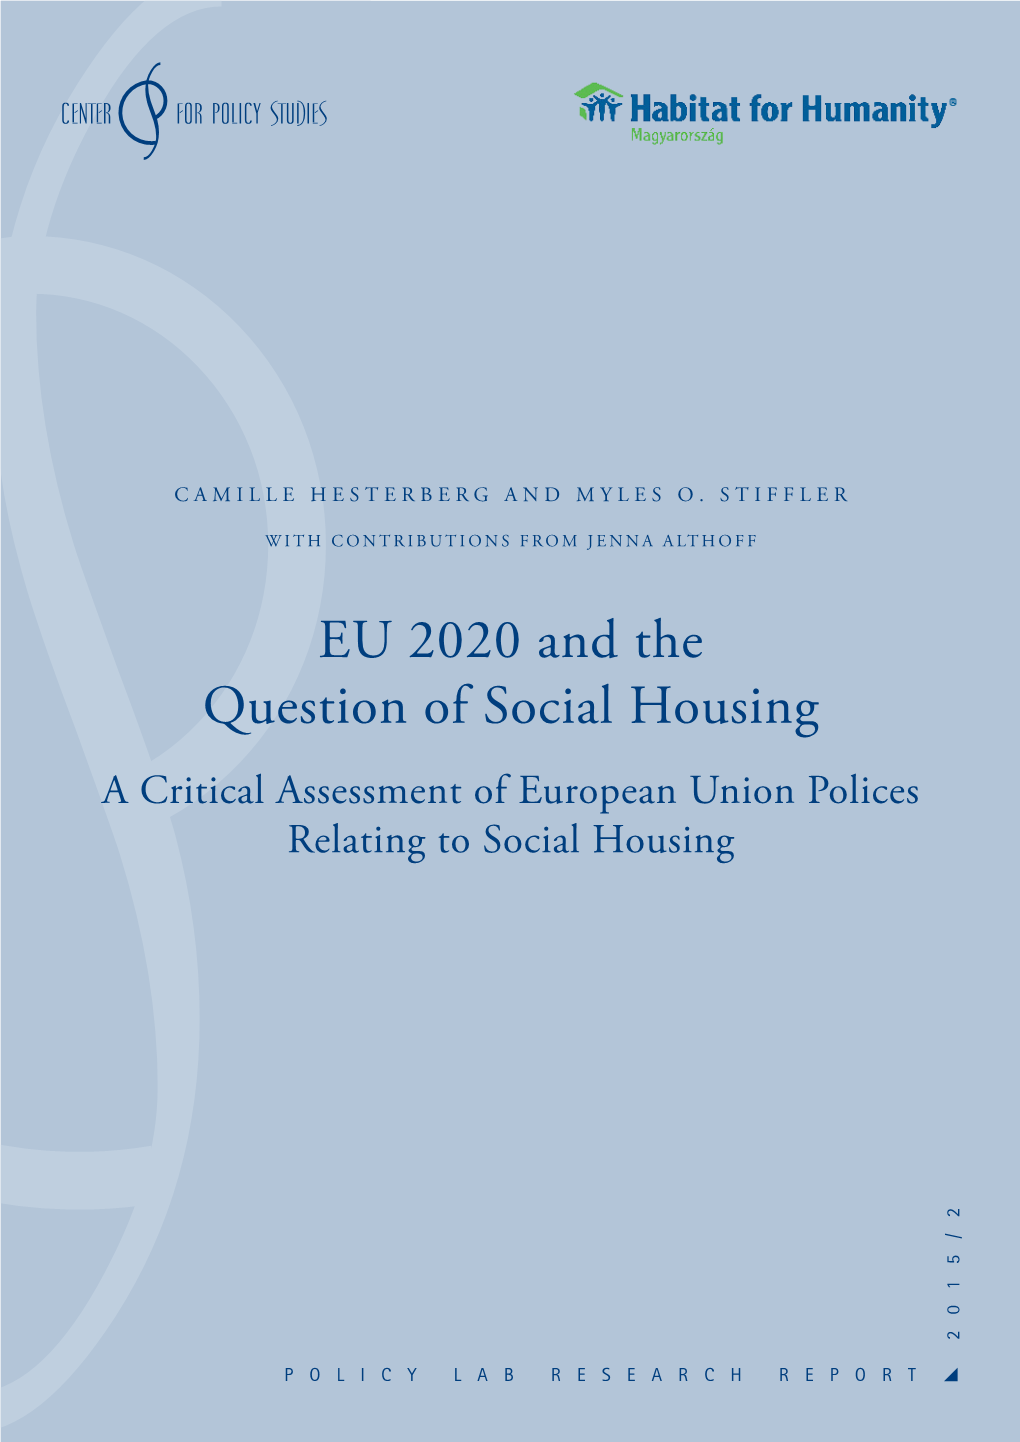 EU 2020 and the Question of Social Housing a Critical Assessment of European Union Polices Relating to Social Housing 2015/2